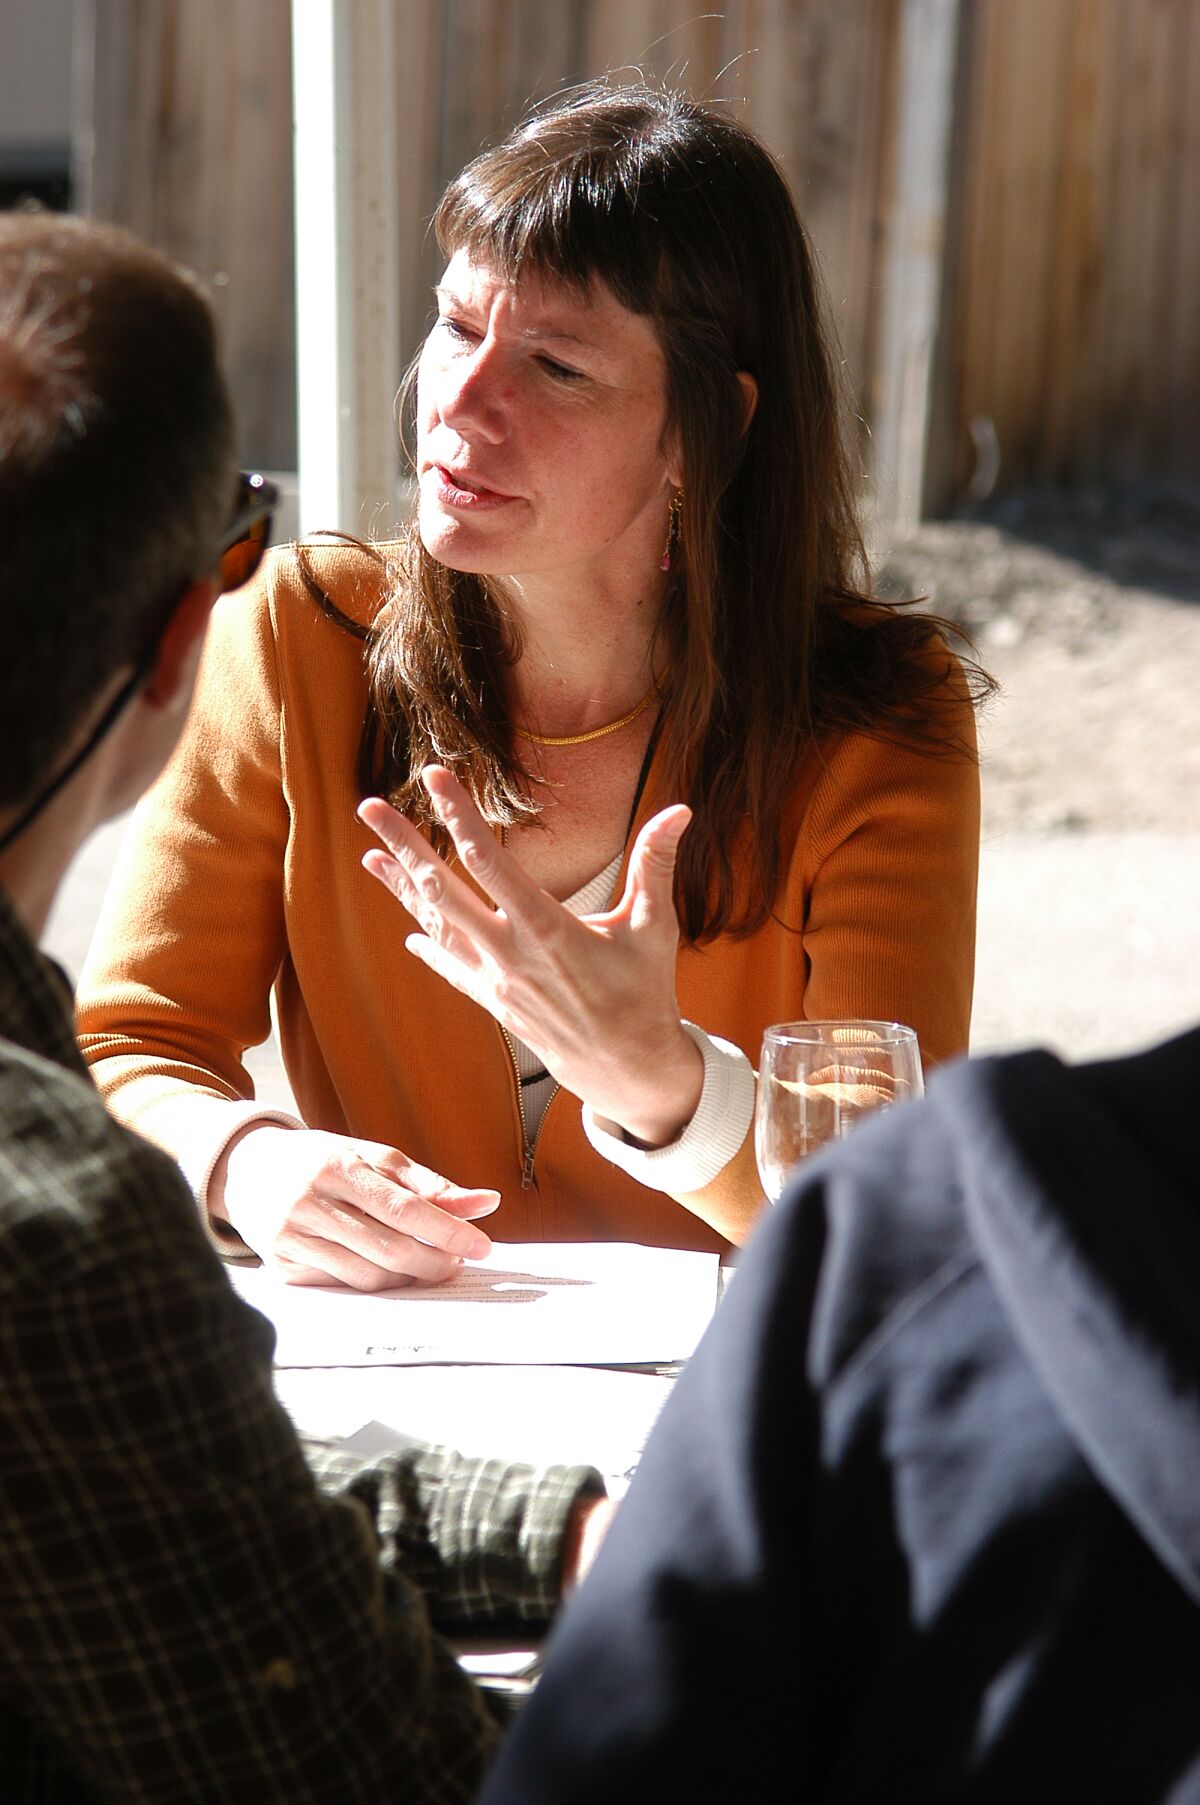 A woman seated at a table talking.